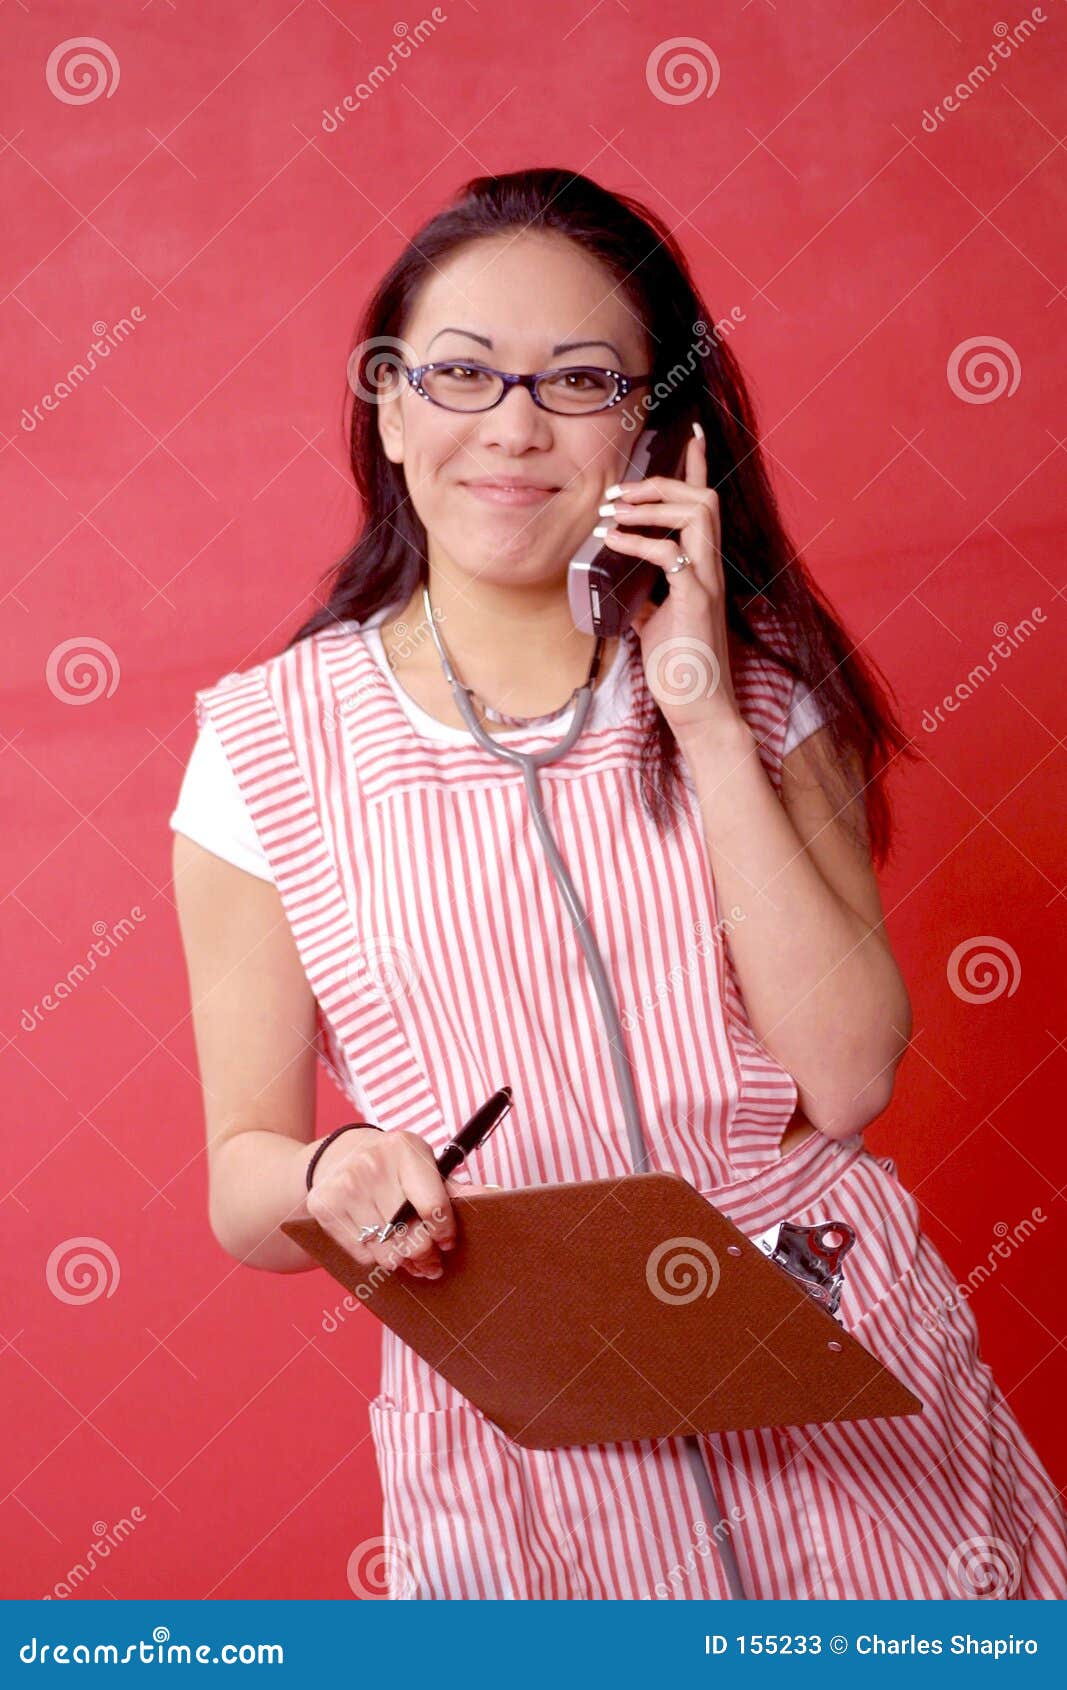 Candy Stripper Ready To Help Stock Photos - Image: 155233